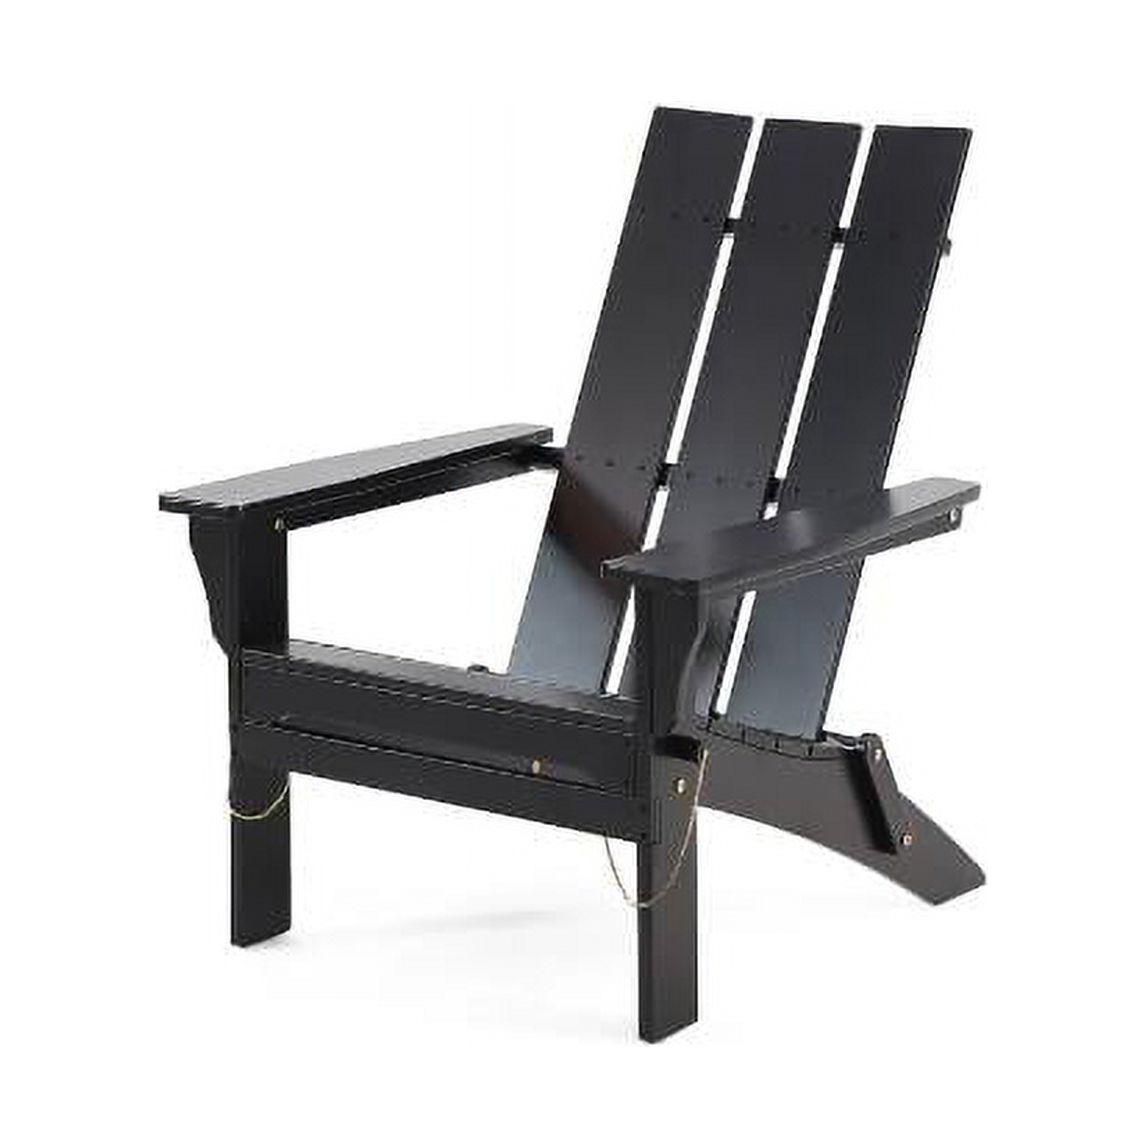 KUIKUI Outdoor Classic Pure Black Solid Wood Adirondack Chair Garden Lounge Chair Foldable - image 5 of 7